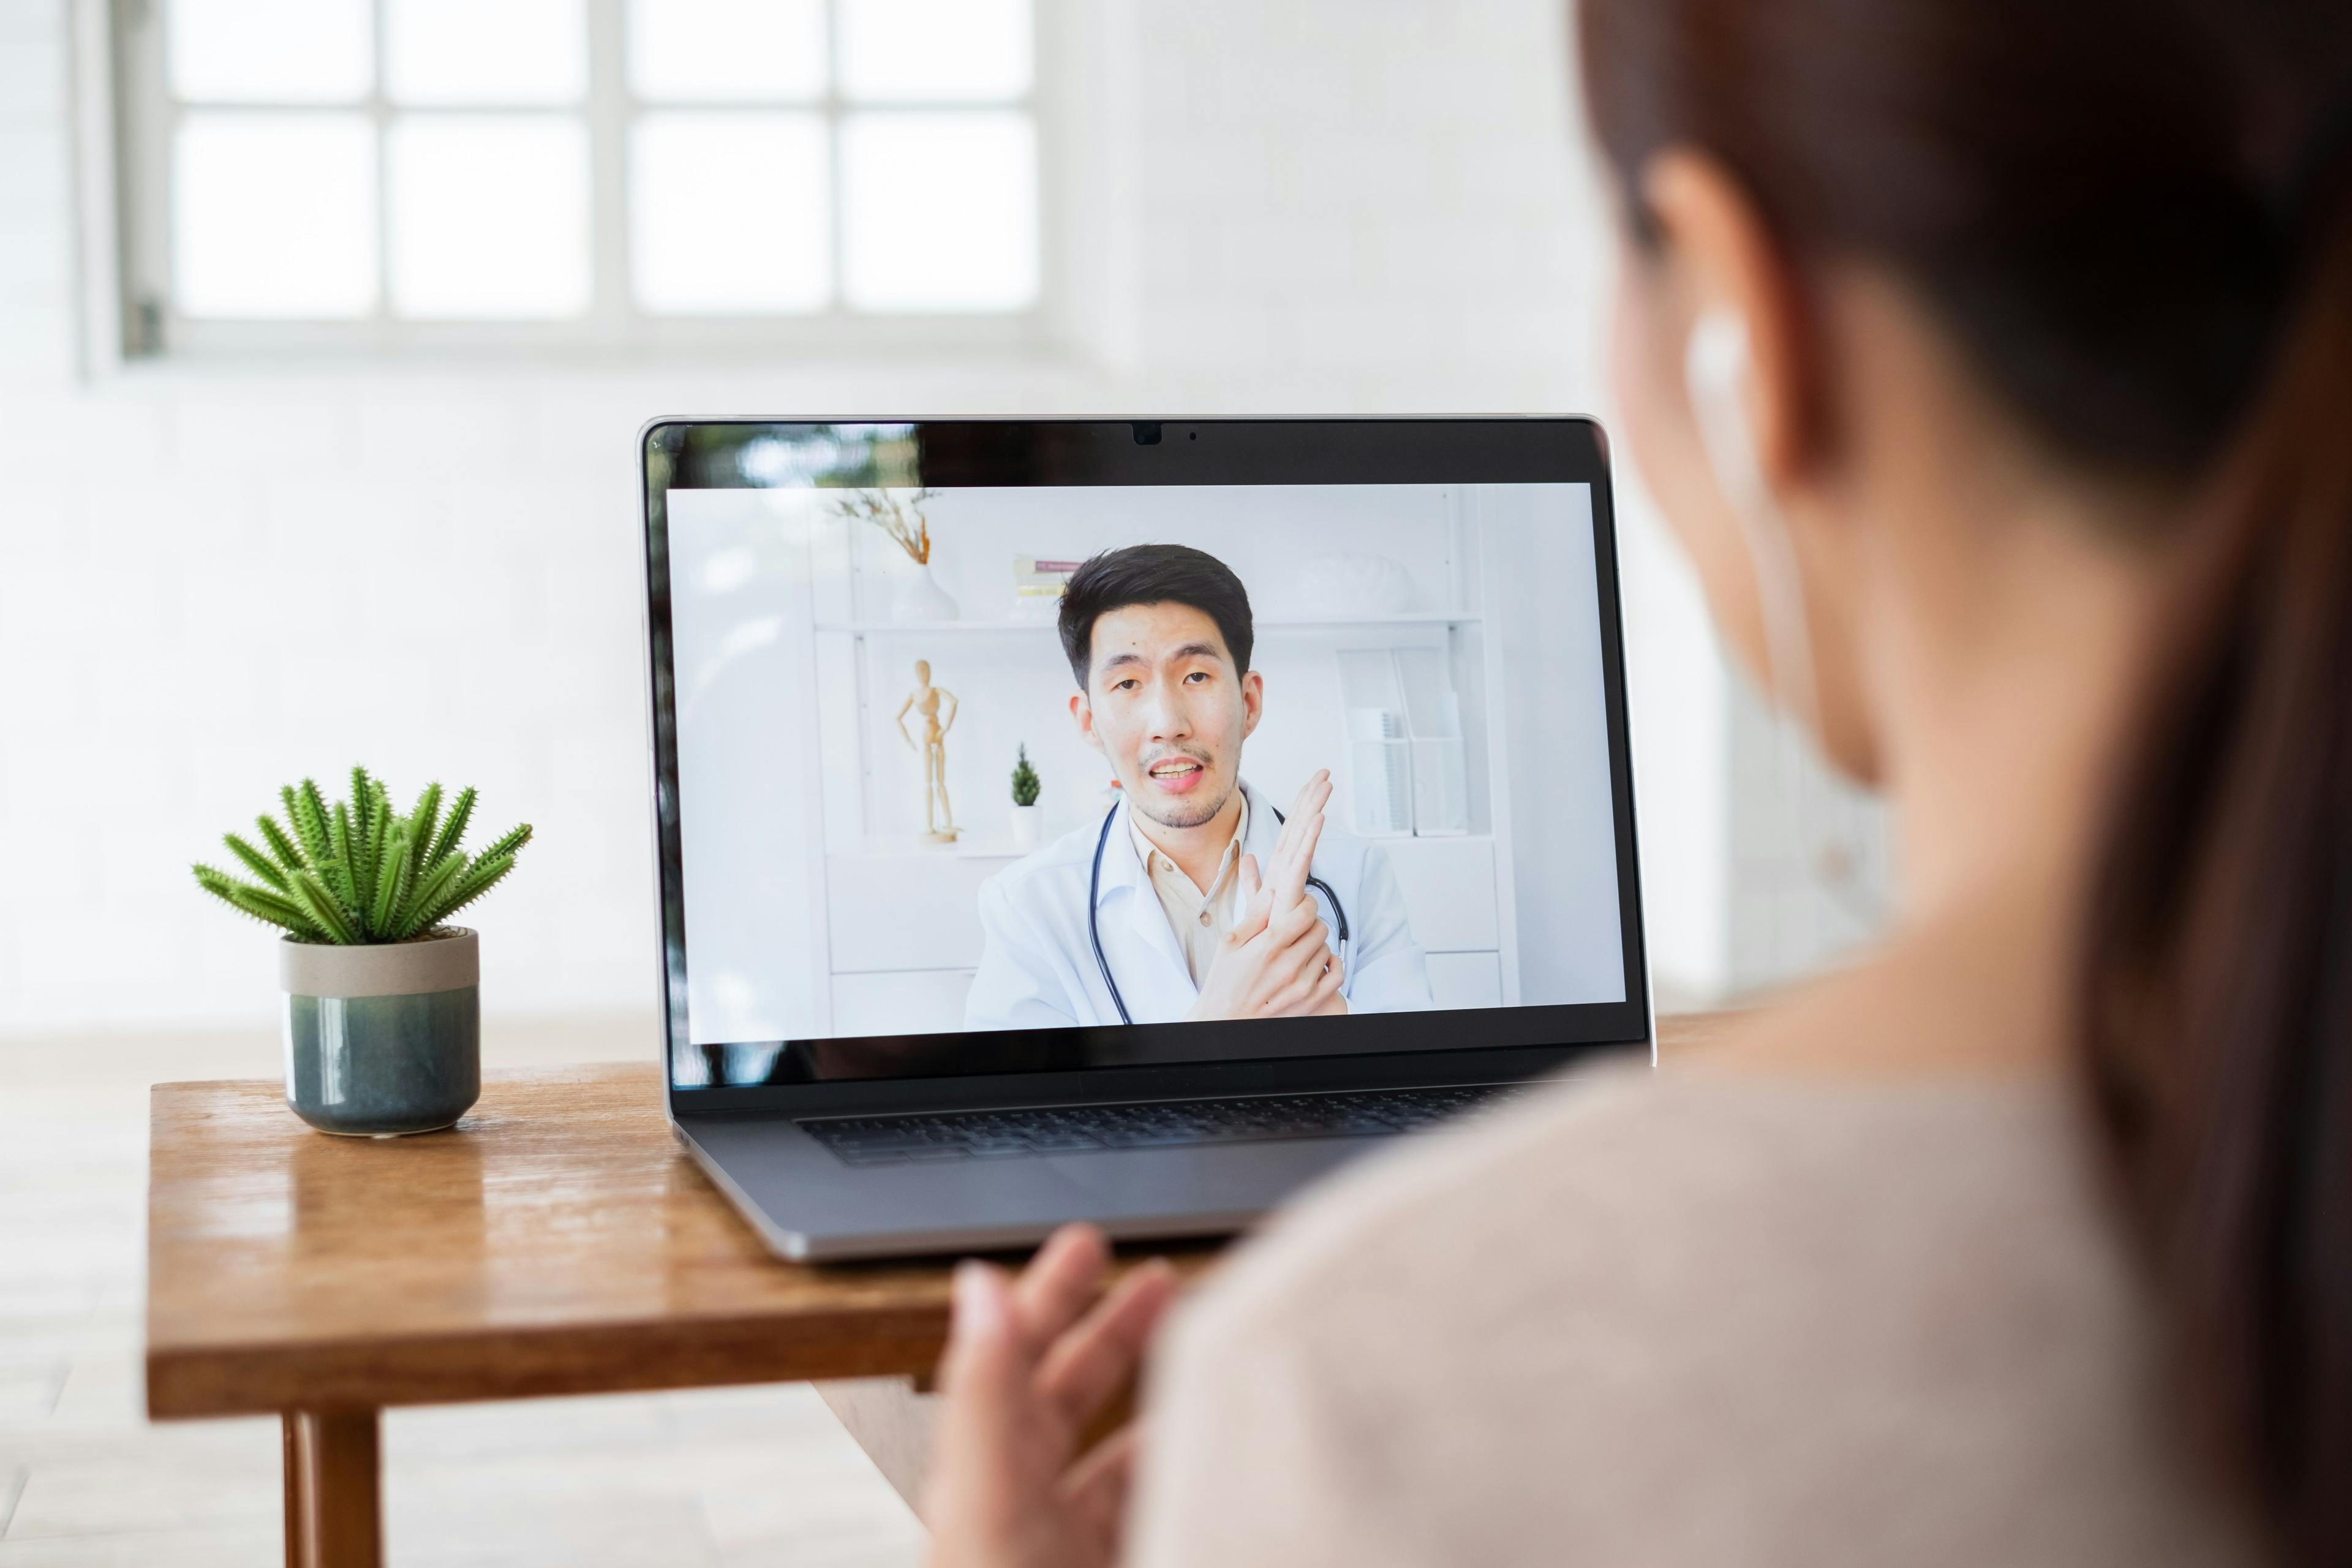 Where telehealth can help patients, and providers, avoid in-person care